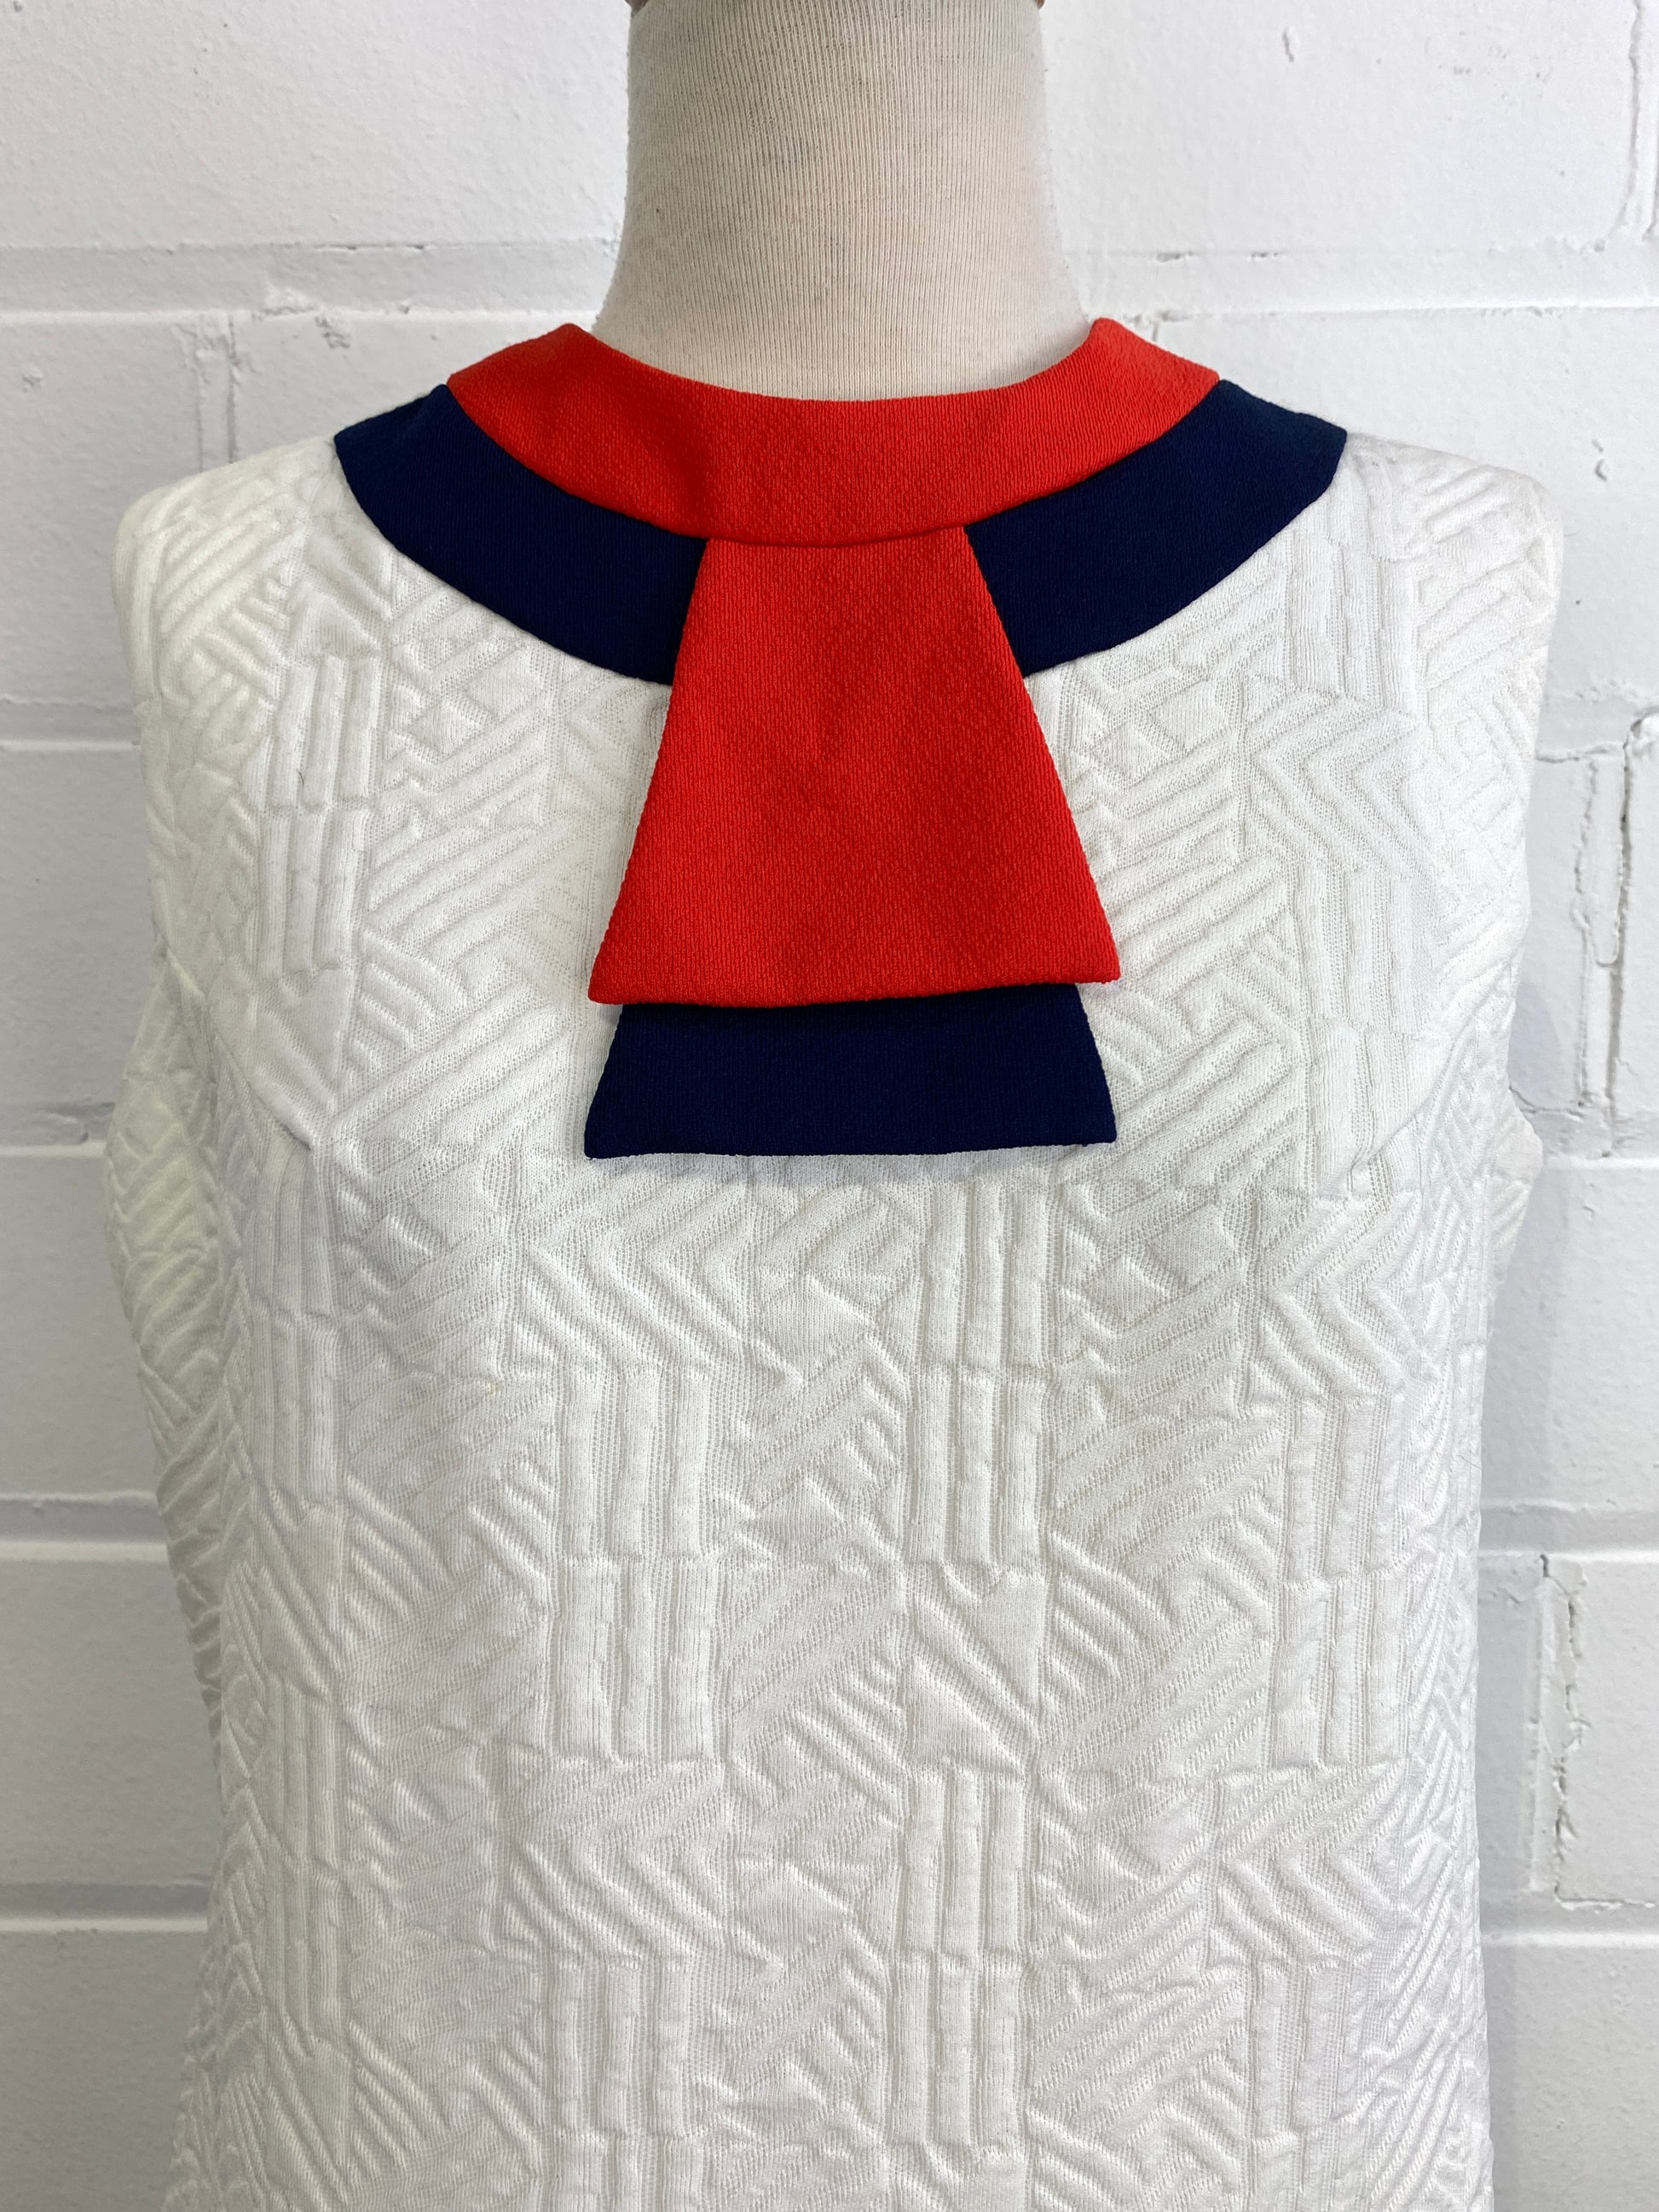 Vintage 1970s White Mod Shift Dress with Red & Blue Collar, M-L